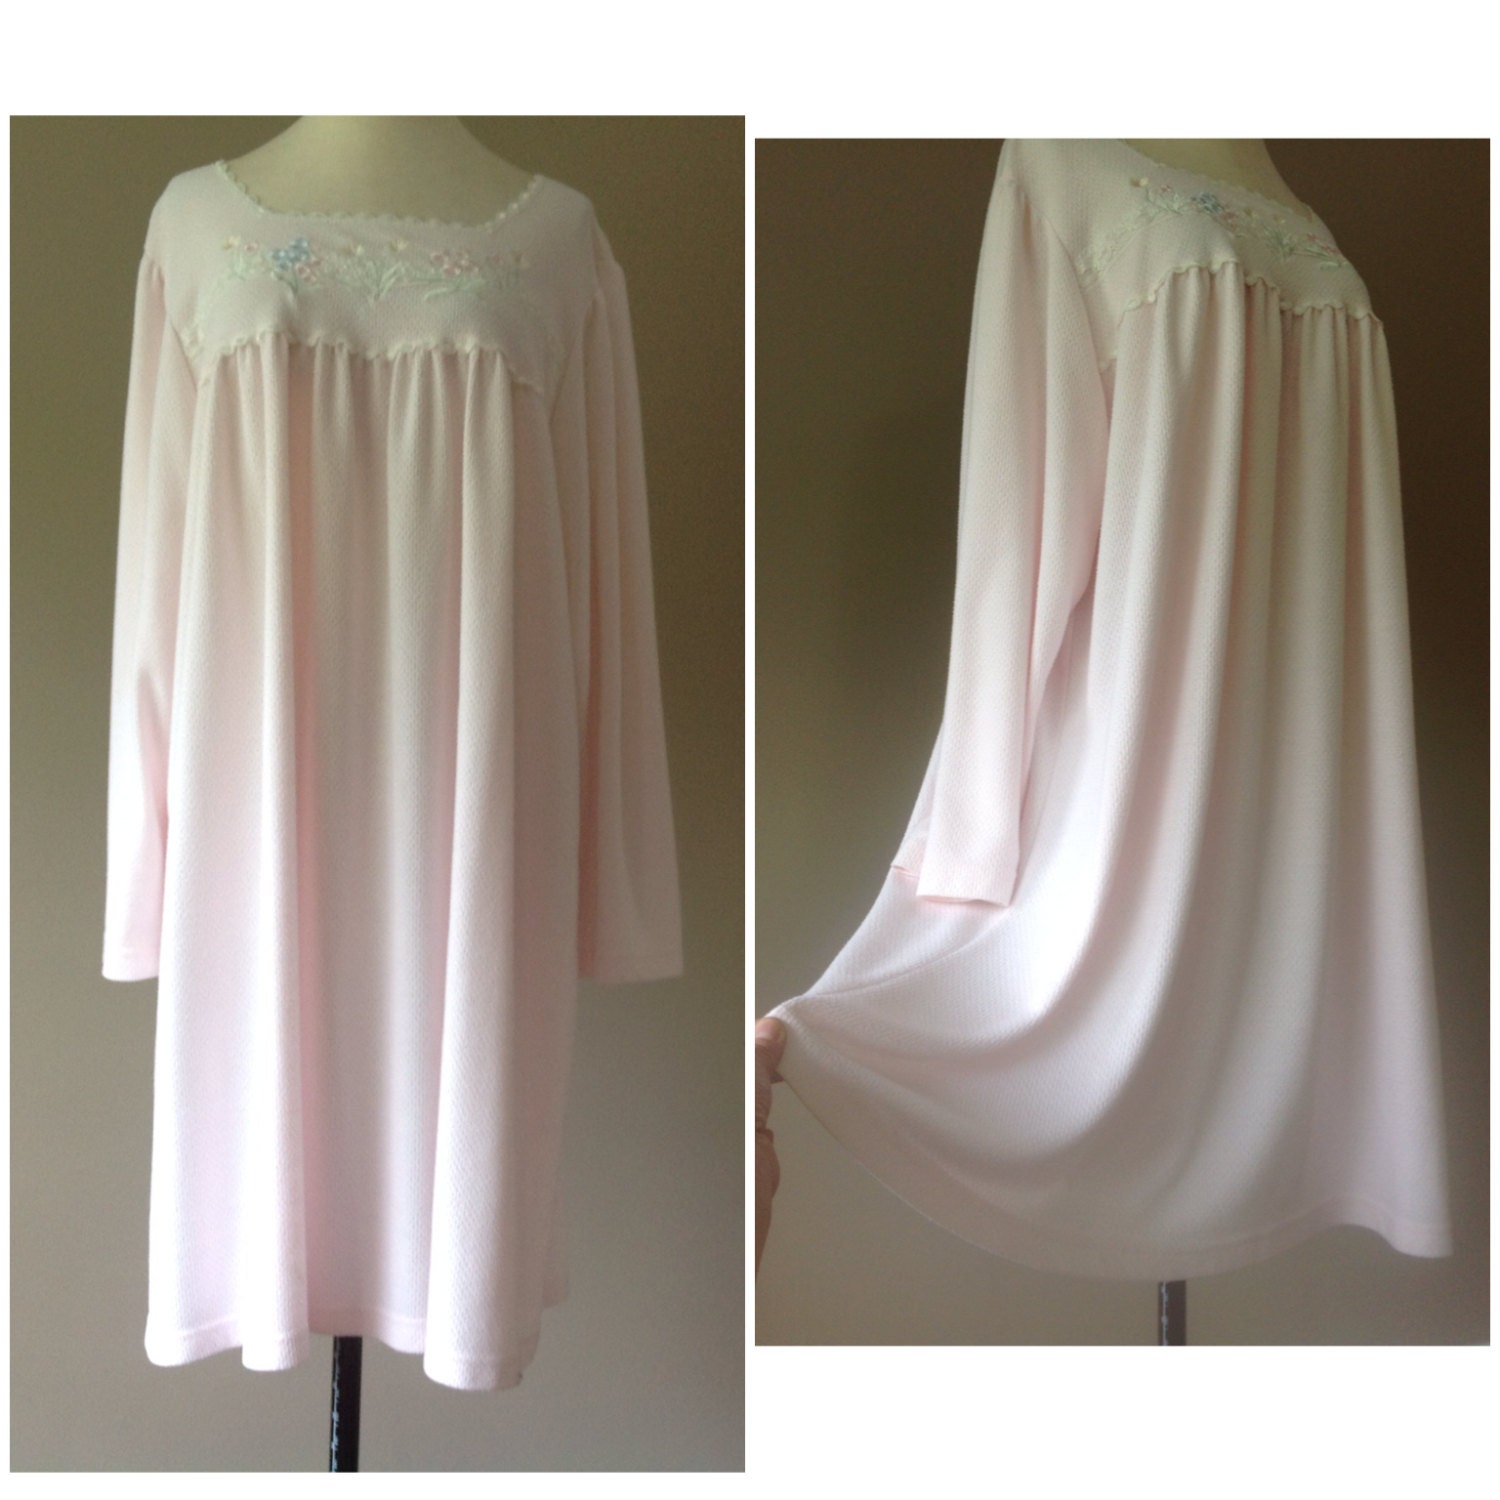 3x Cotton Nightgown Plus Size Sleepwear Pink With Lace 6430